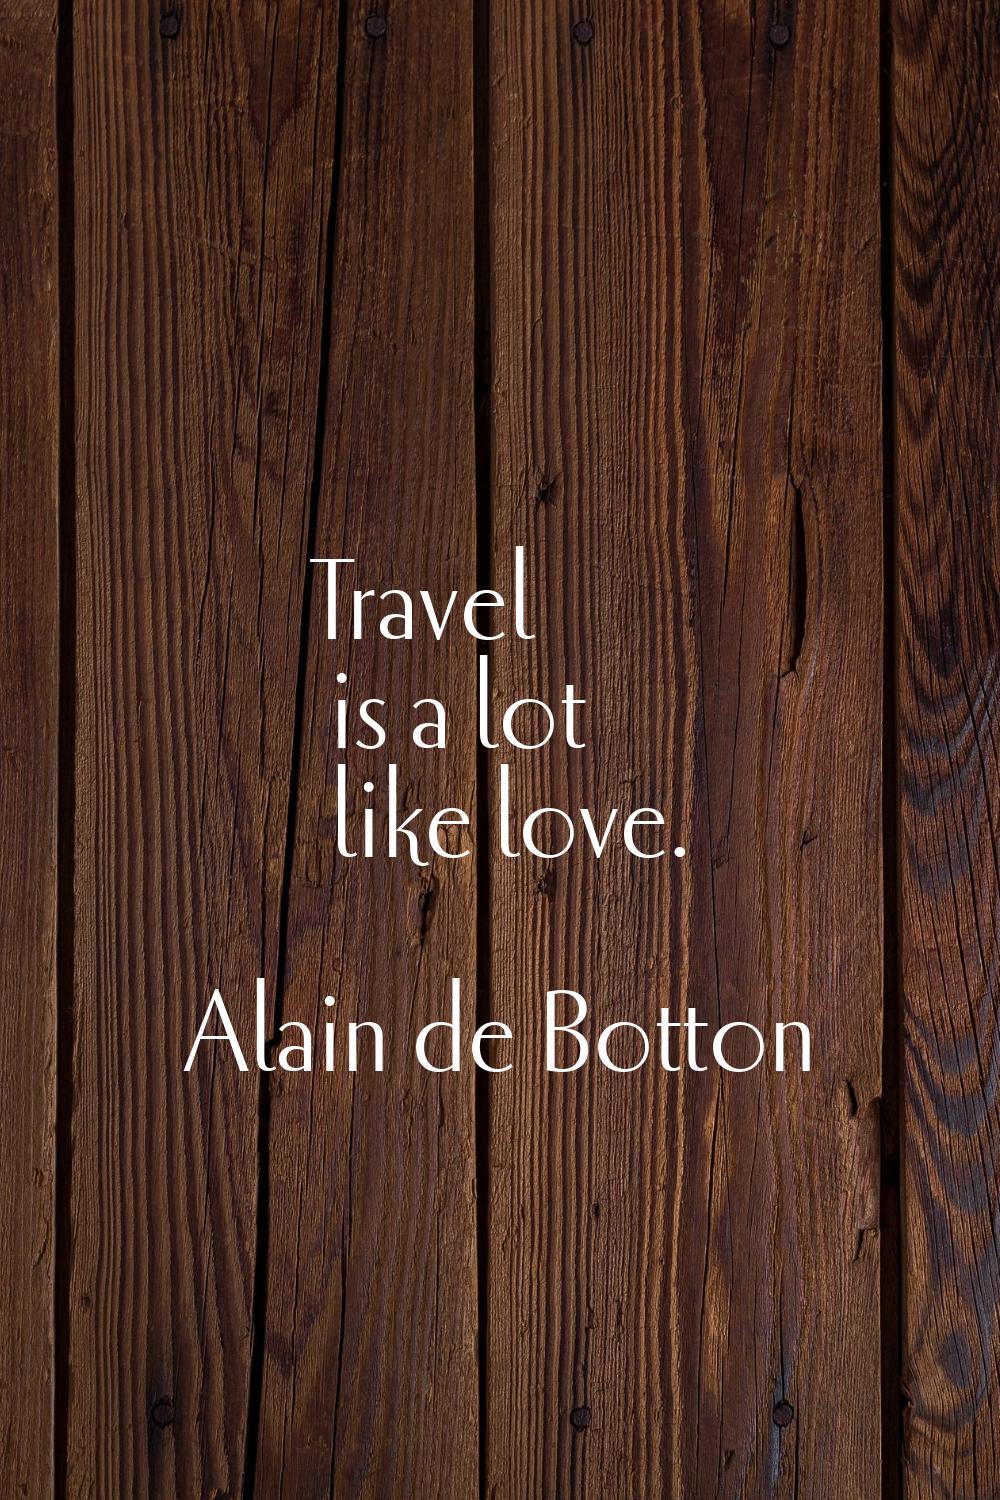 Travel is a lot like love.